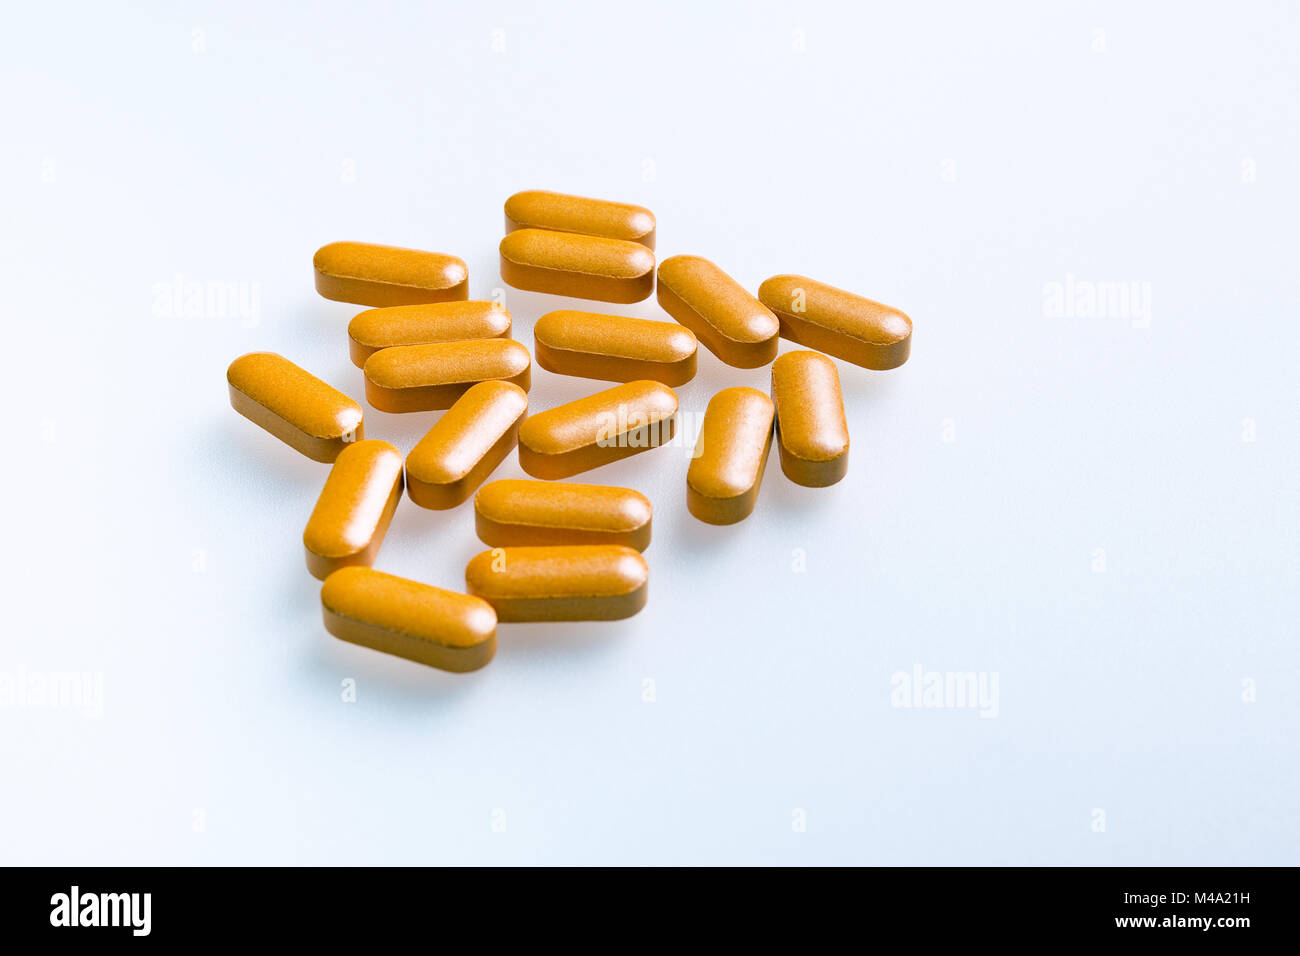 collection of pills or vitamins on a white background Stock Photo